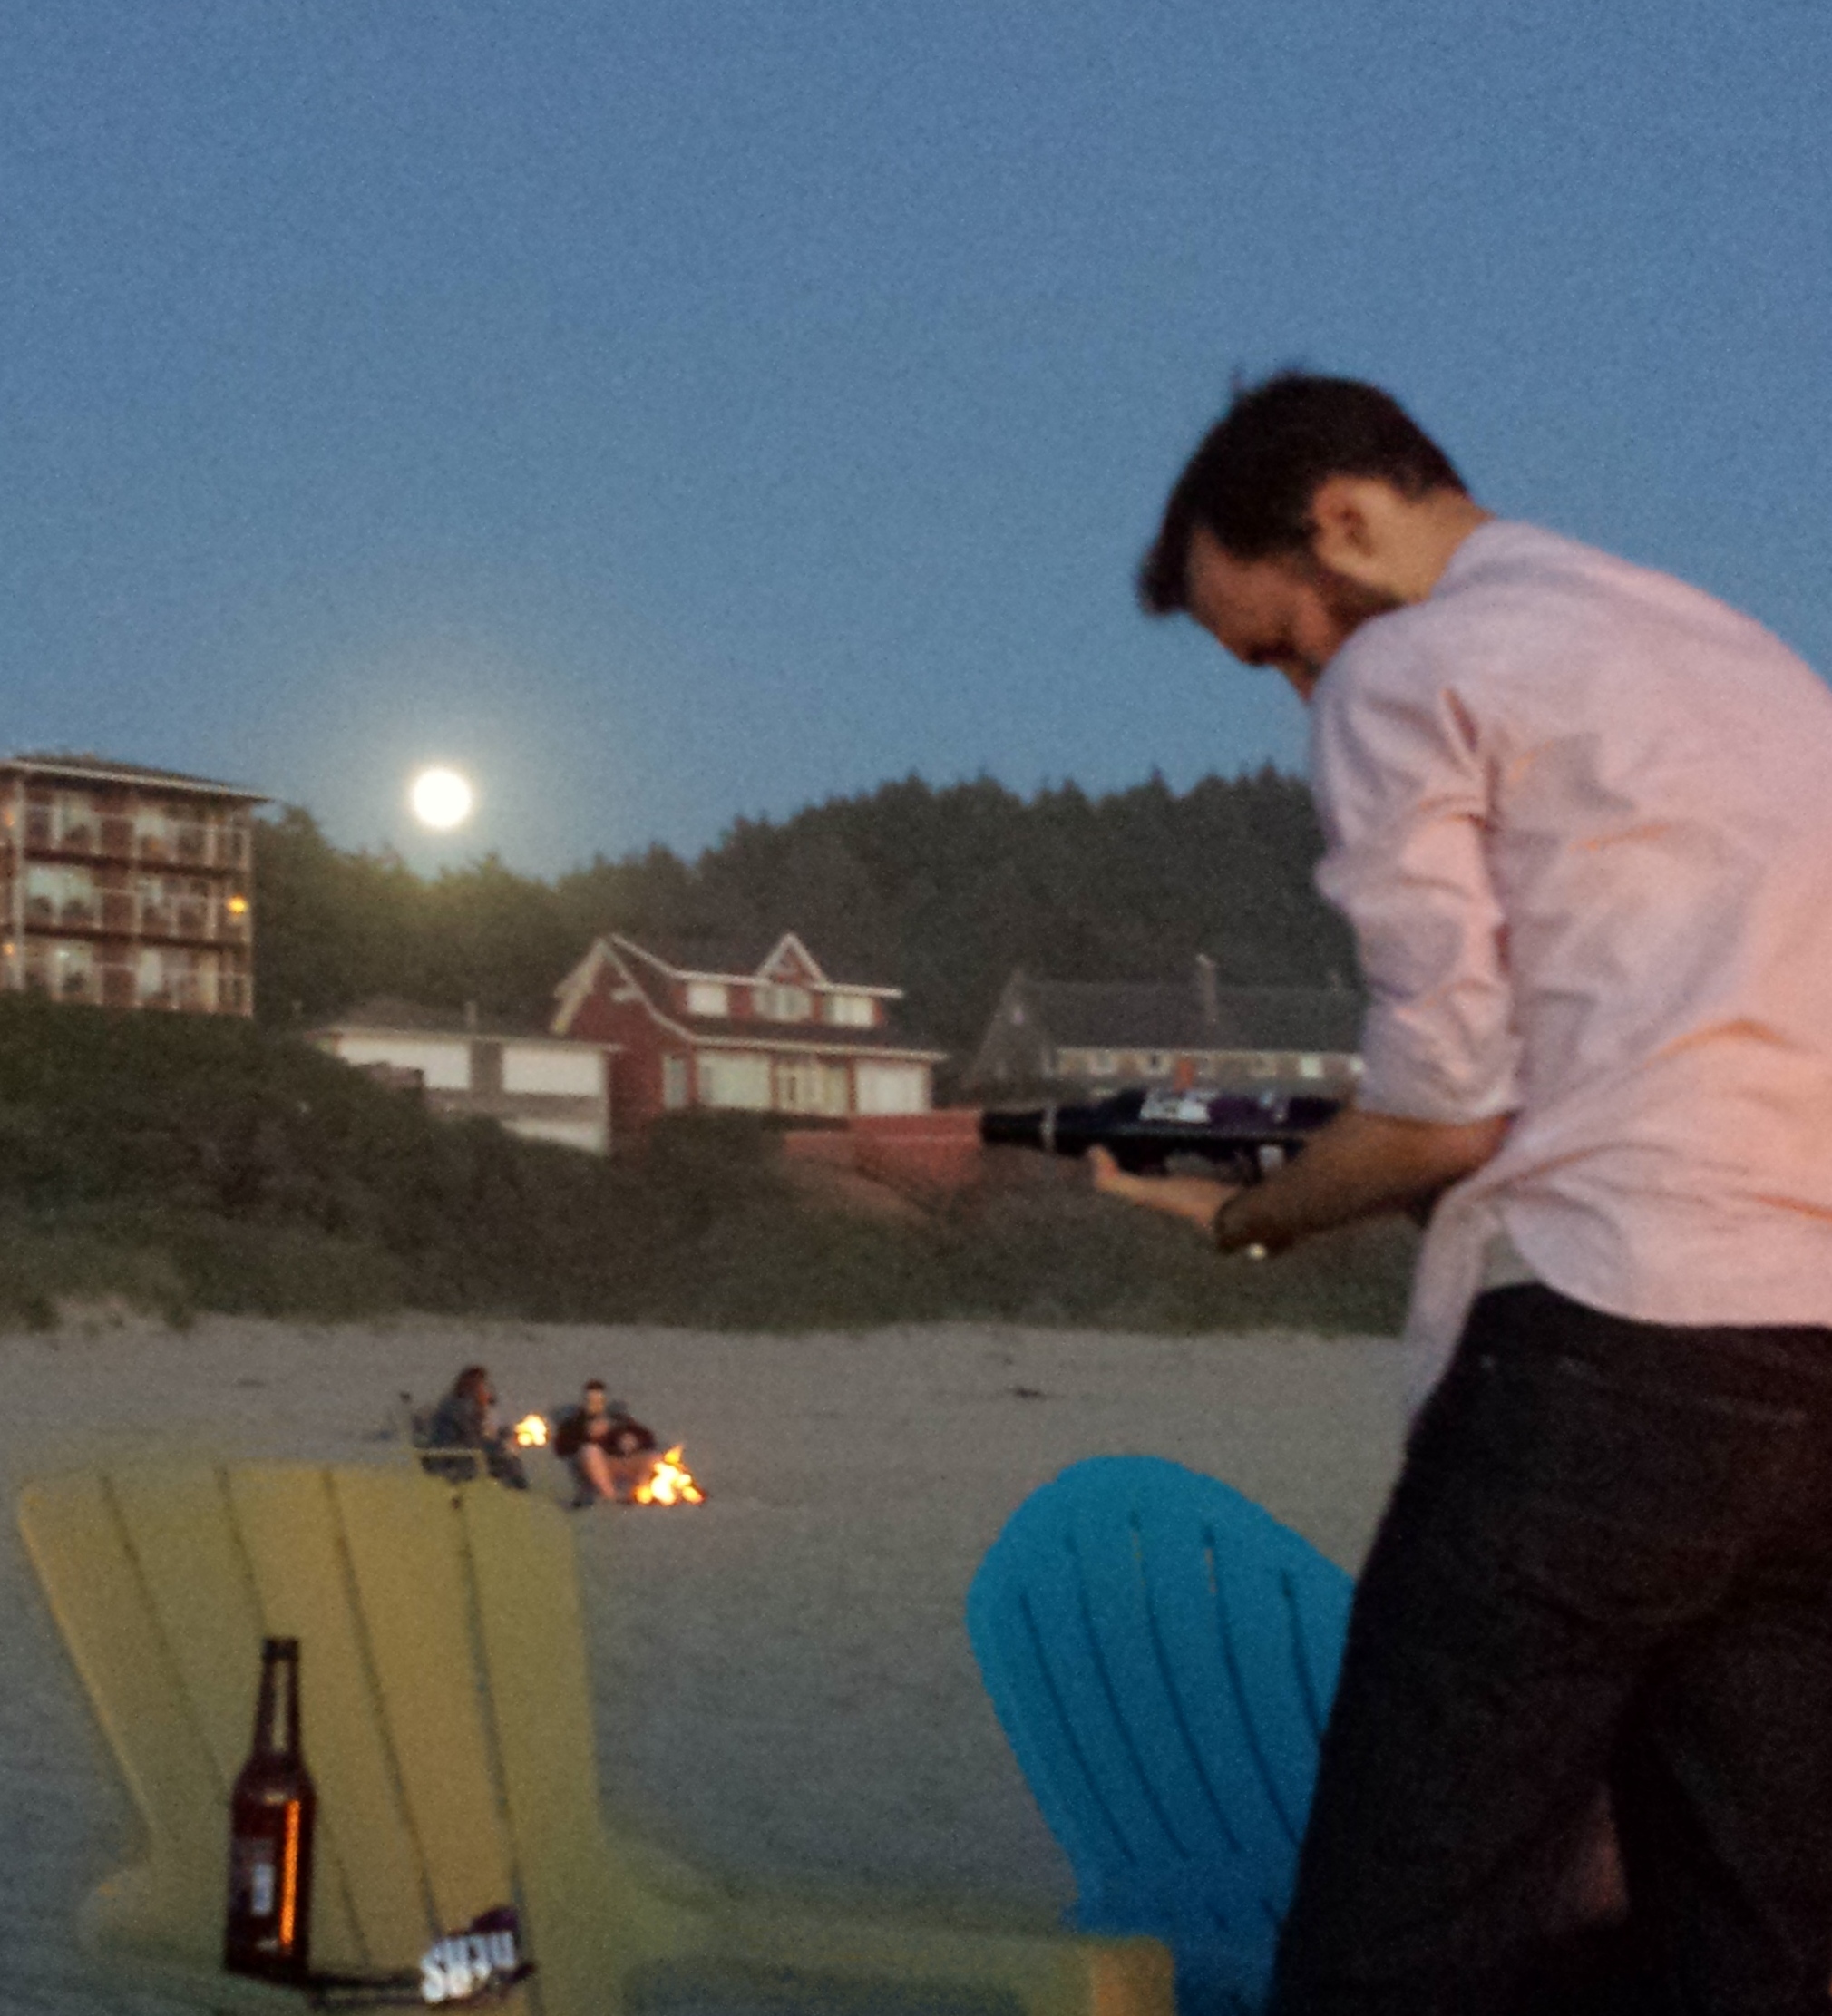 My son (with beer, not s'mores) on the beach, with the full moon rising